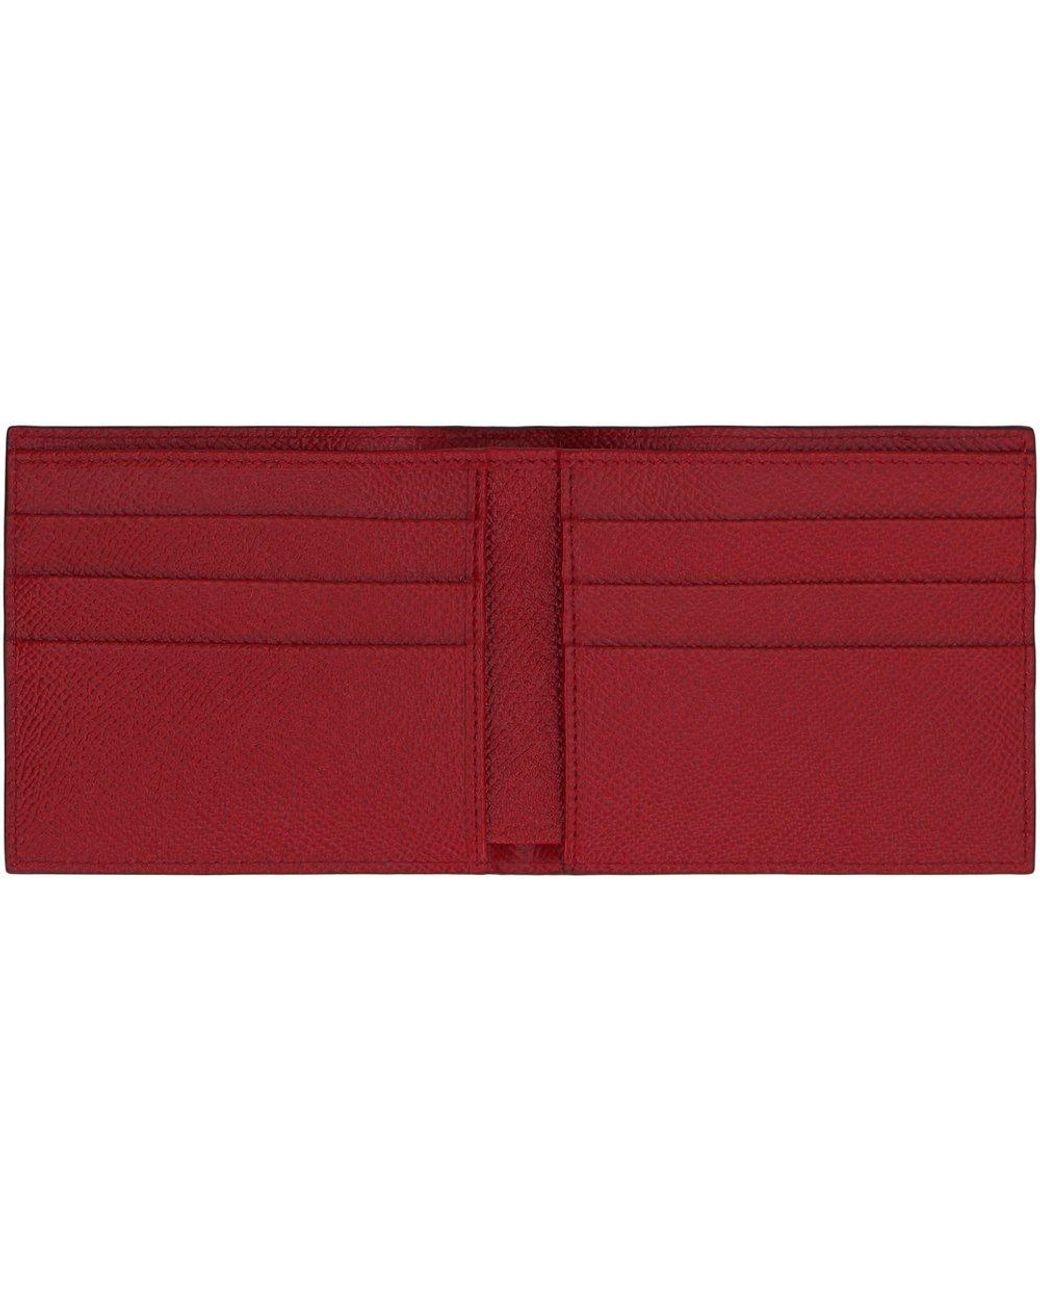 Dolce & Gabbana Dauphine-print Leather Wallet in Red for Men | Lyst